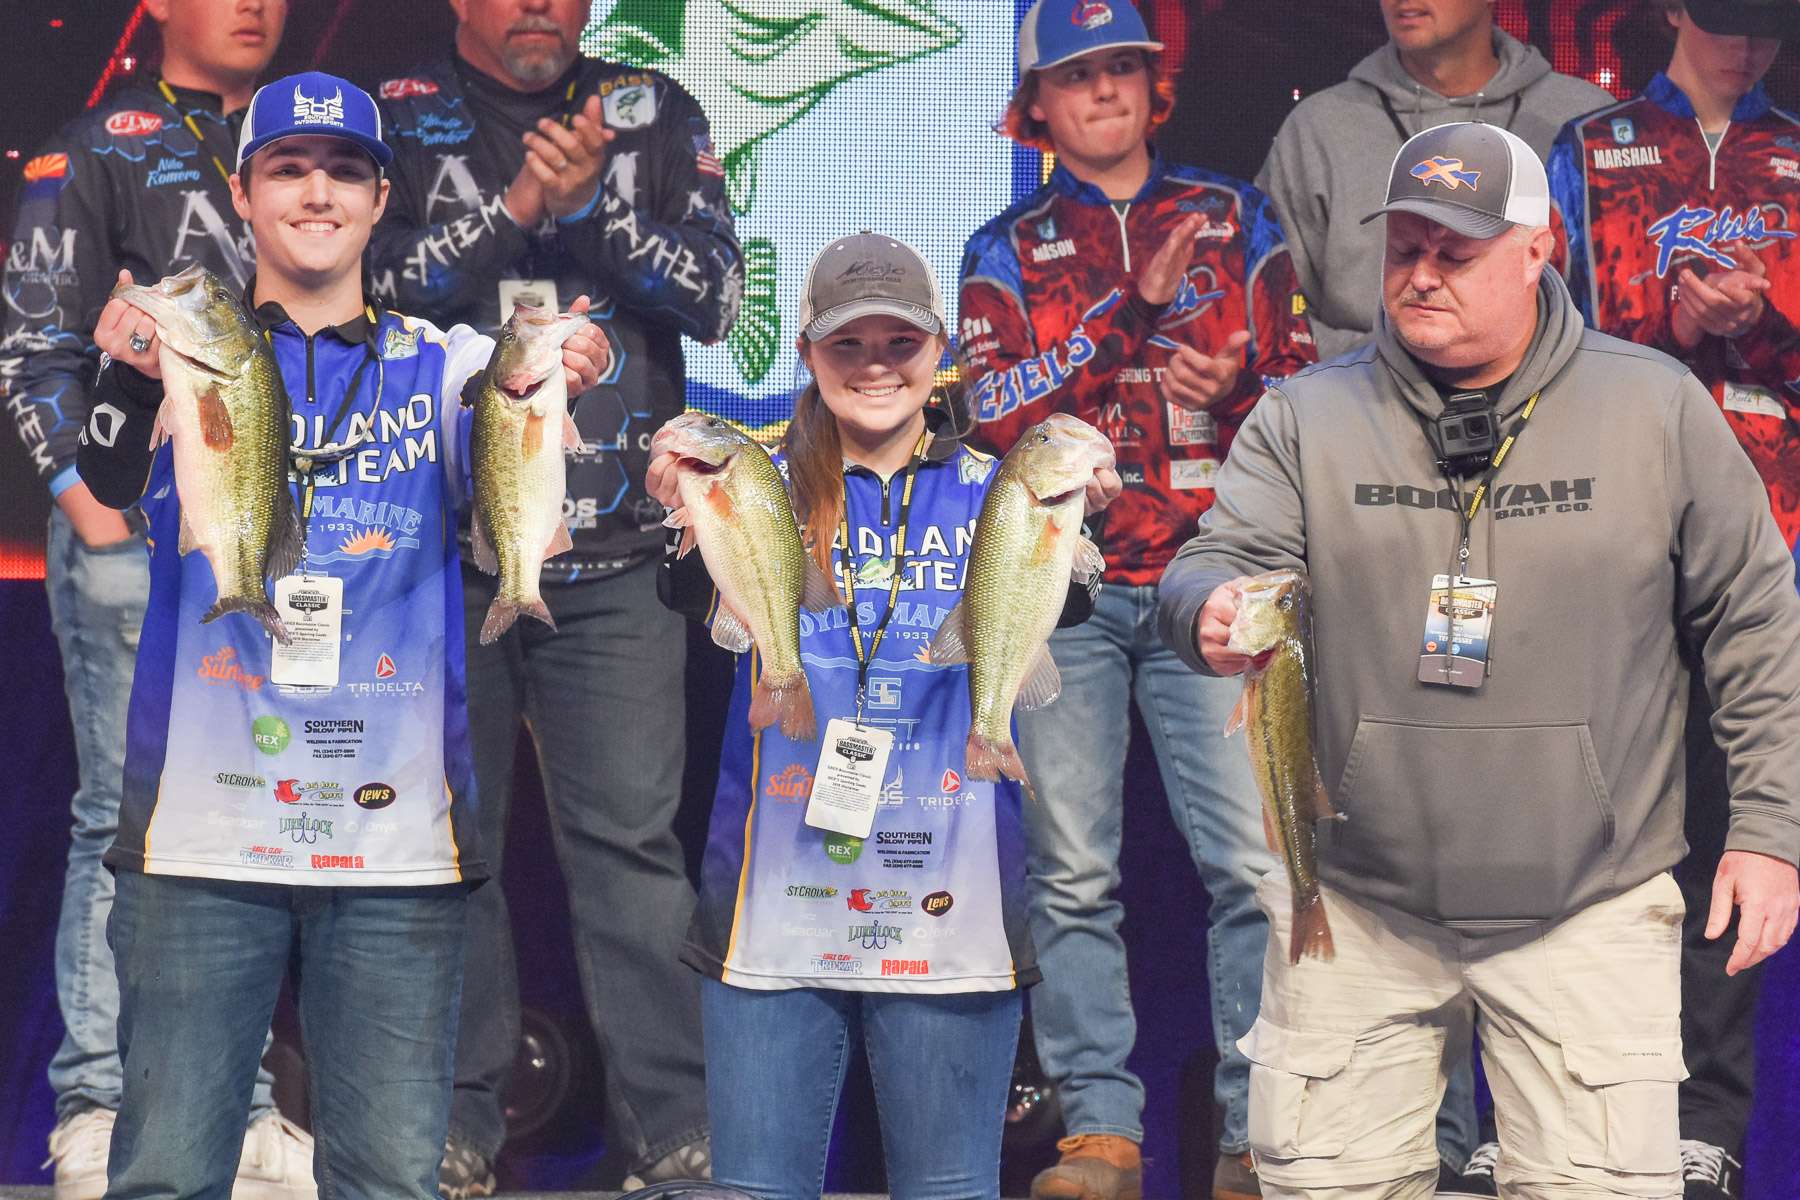 Aaron Cherry and Gracie Herbold from Headland Bass Team